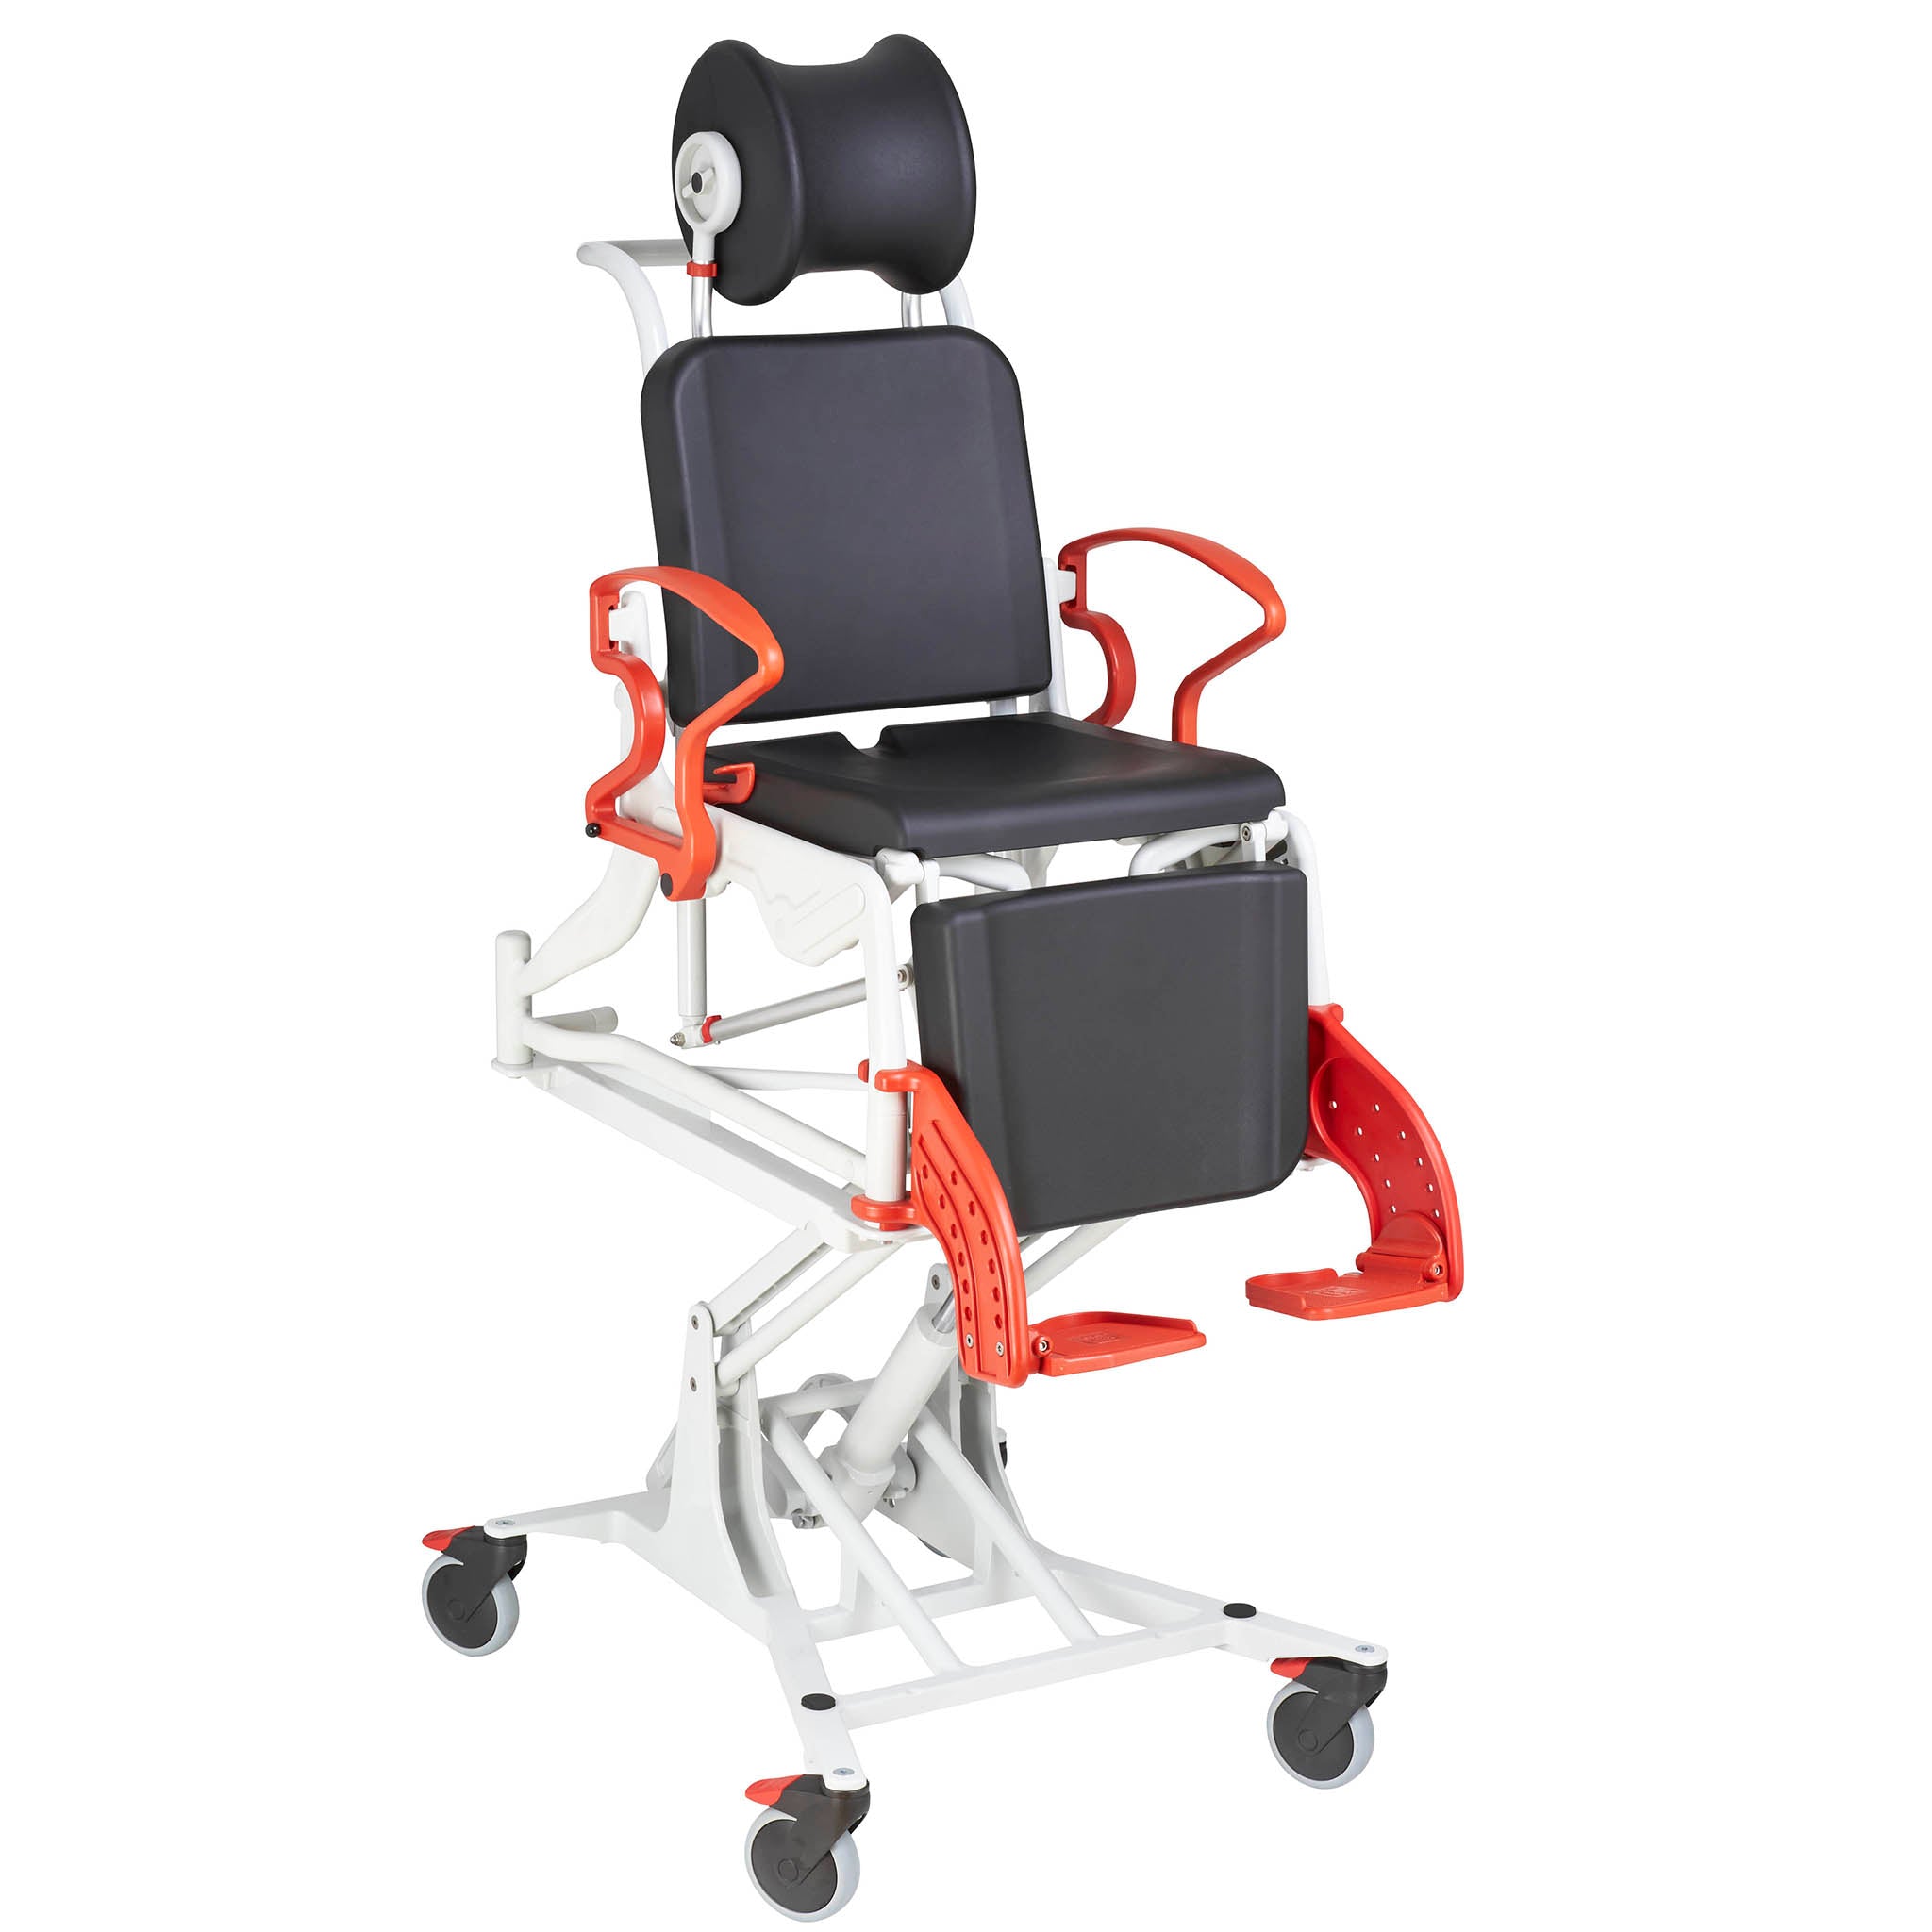 TR Equipment Rebotec Phoenix Hydraulic Height Adjustable Reclining Commode/ Shower Chair